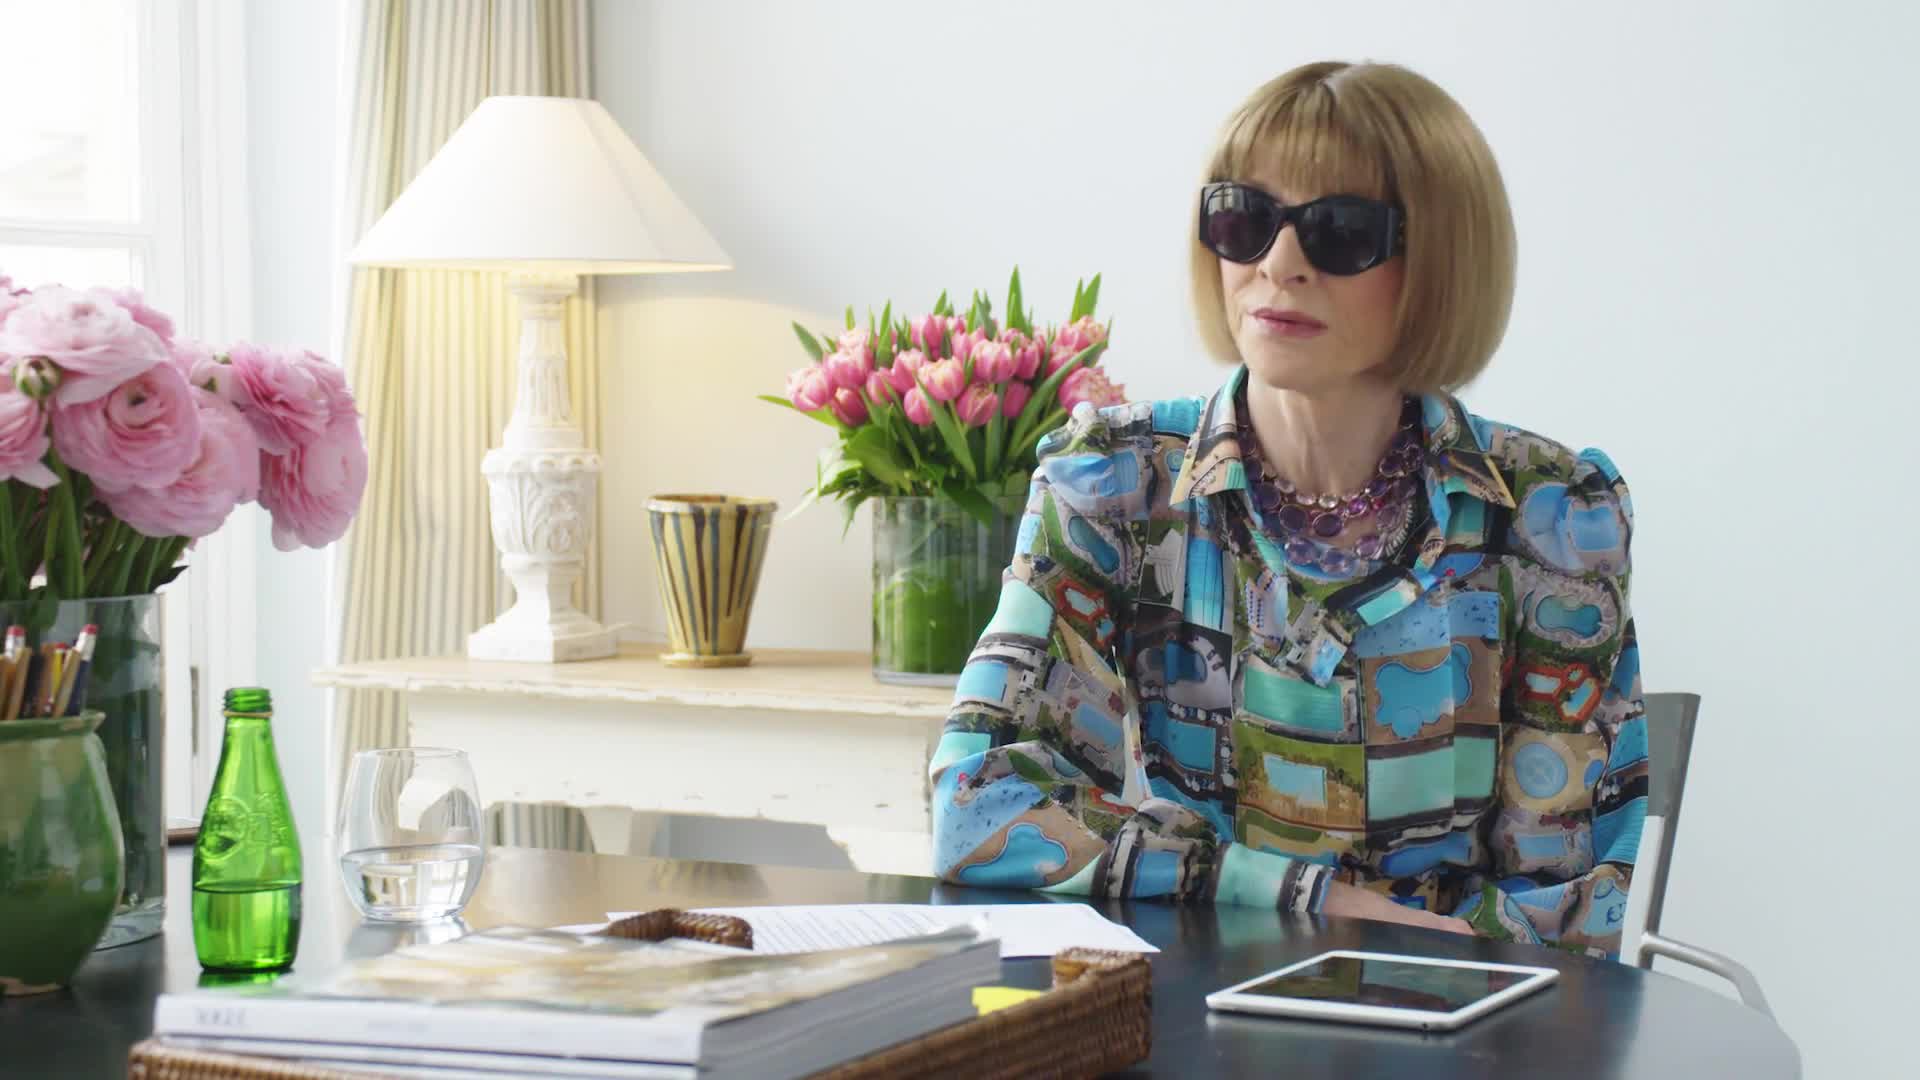 Vogue' and Nike Collaborated on a Pair of Anna Wintour-Inspired